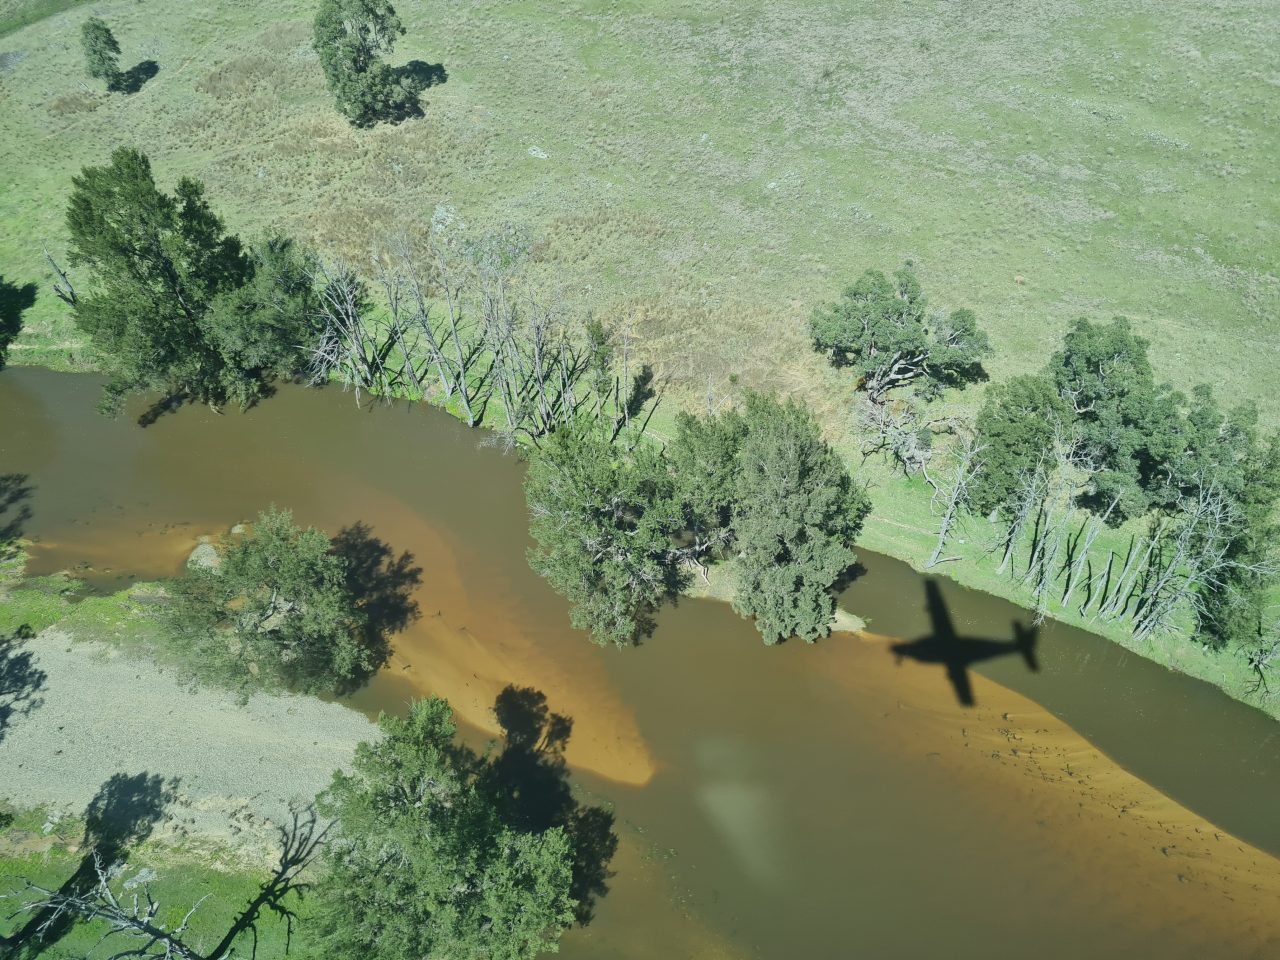 Aerial photo of a river with brown water reaching the river banks. THe surrounding land is green with ground vegetation and a few trees lining the river bank. There is also an exposed gravel section of river bed that is not inundated. The plane shadow is in the foreground. It is a sunny day